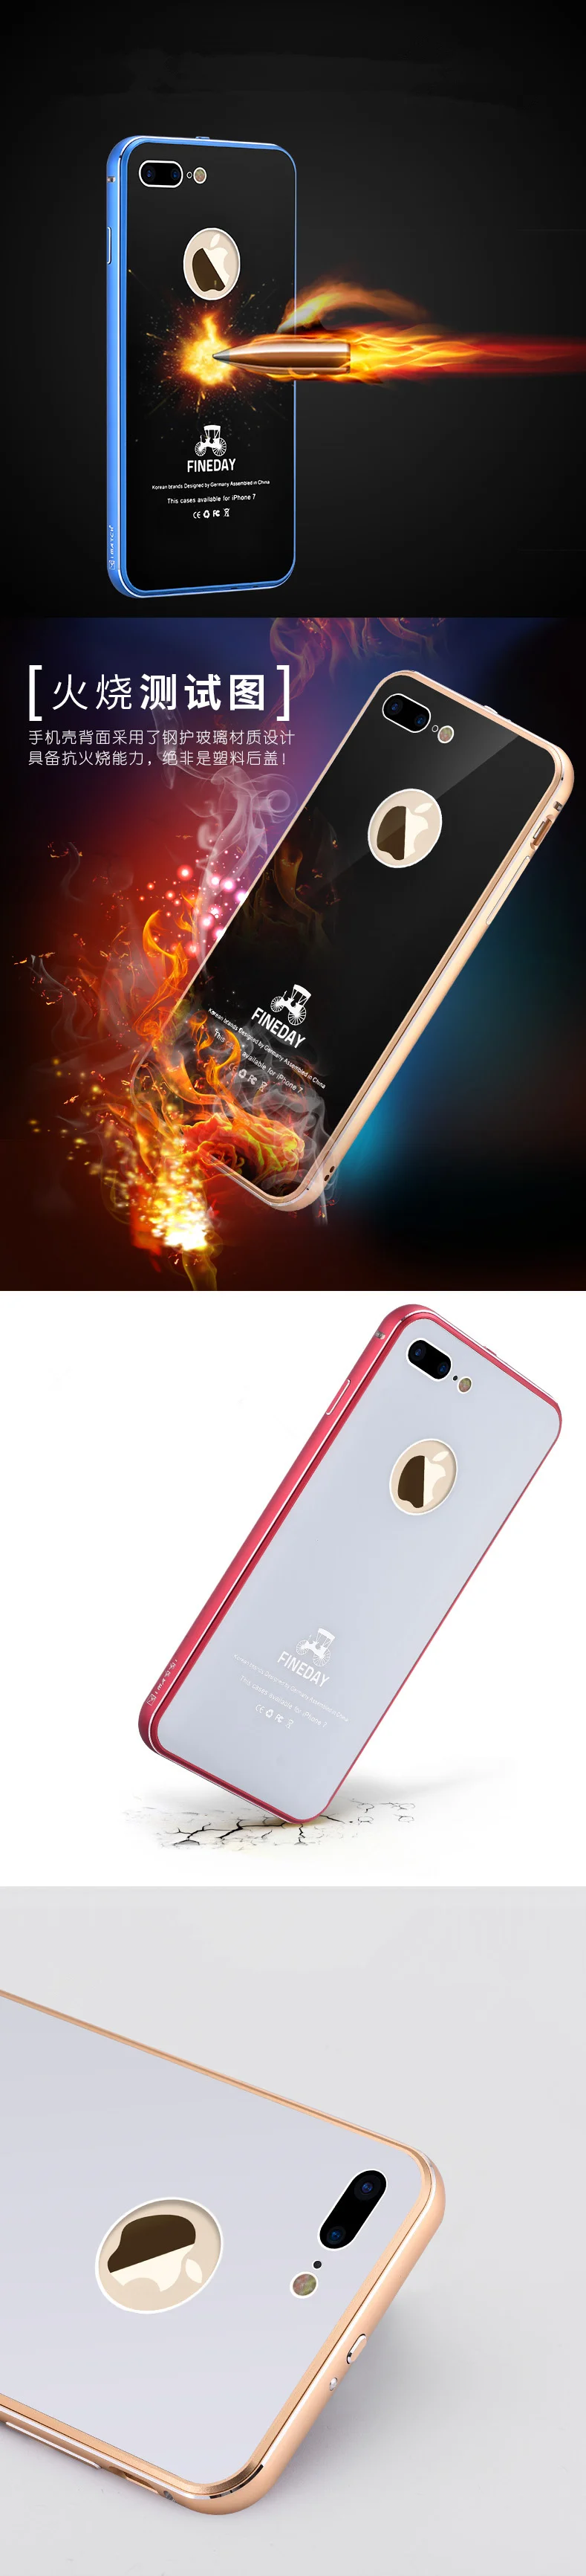 iMatch Aviation Aluminum Alloy Metal Bumper Tempered Glass Back Cover Case for Apple iPhone 8 Plus & iPhone 8